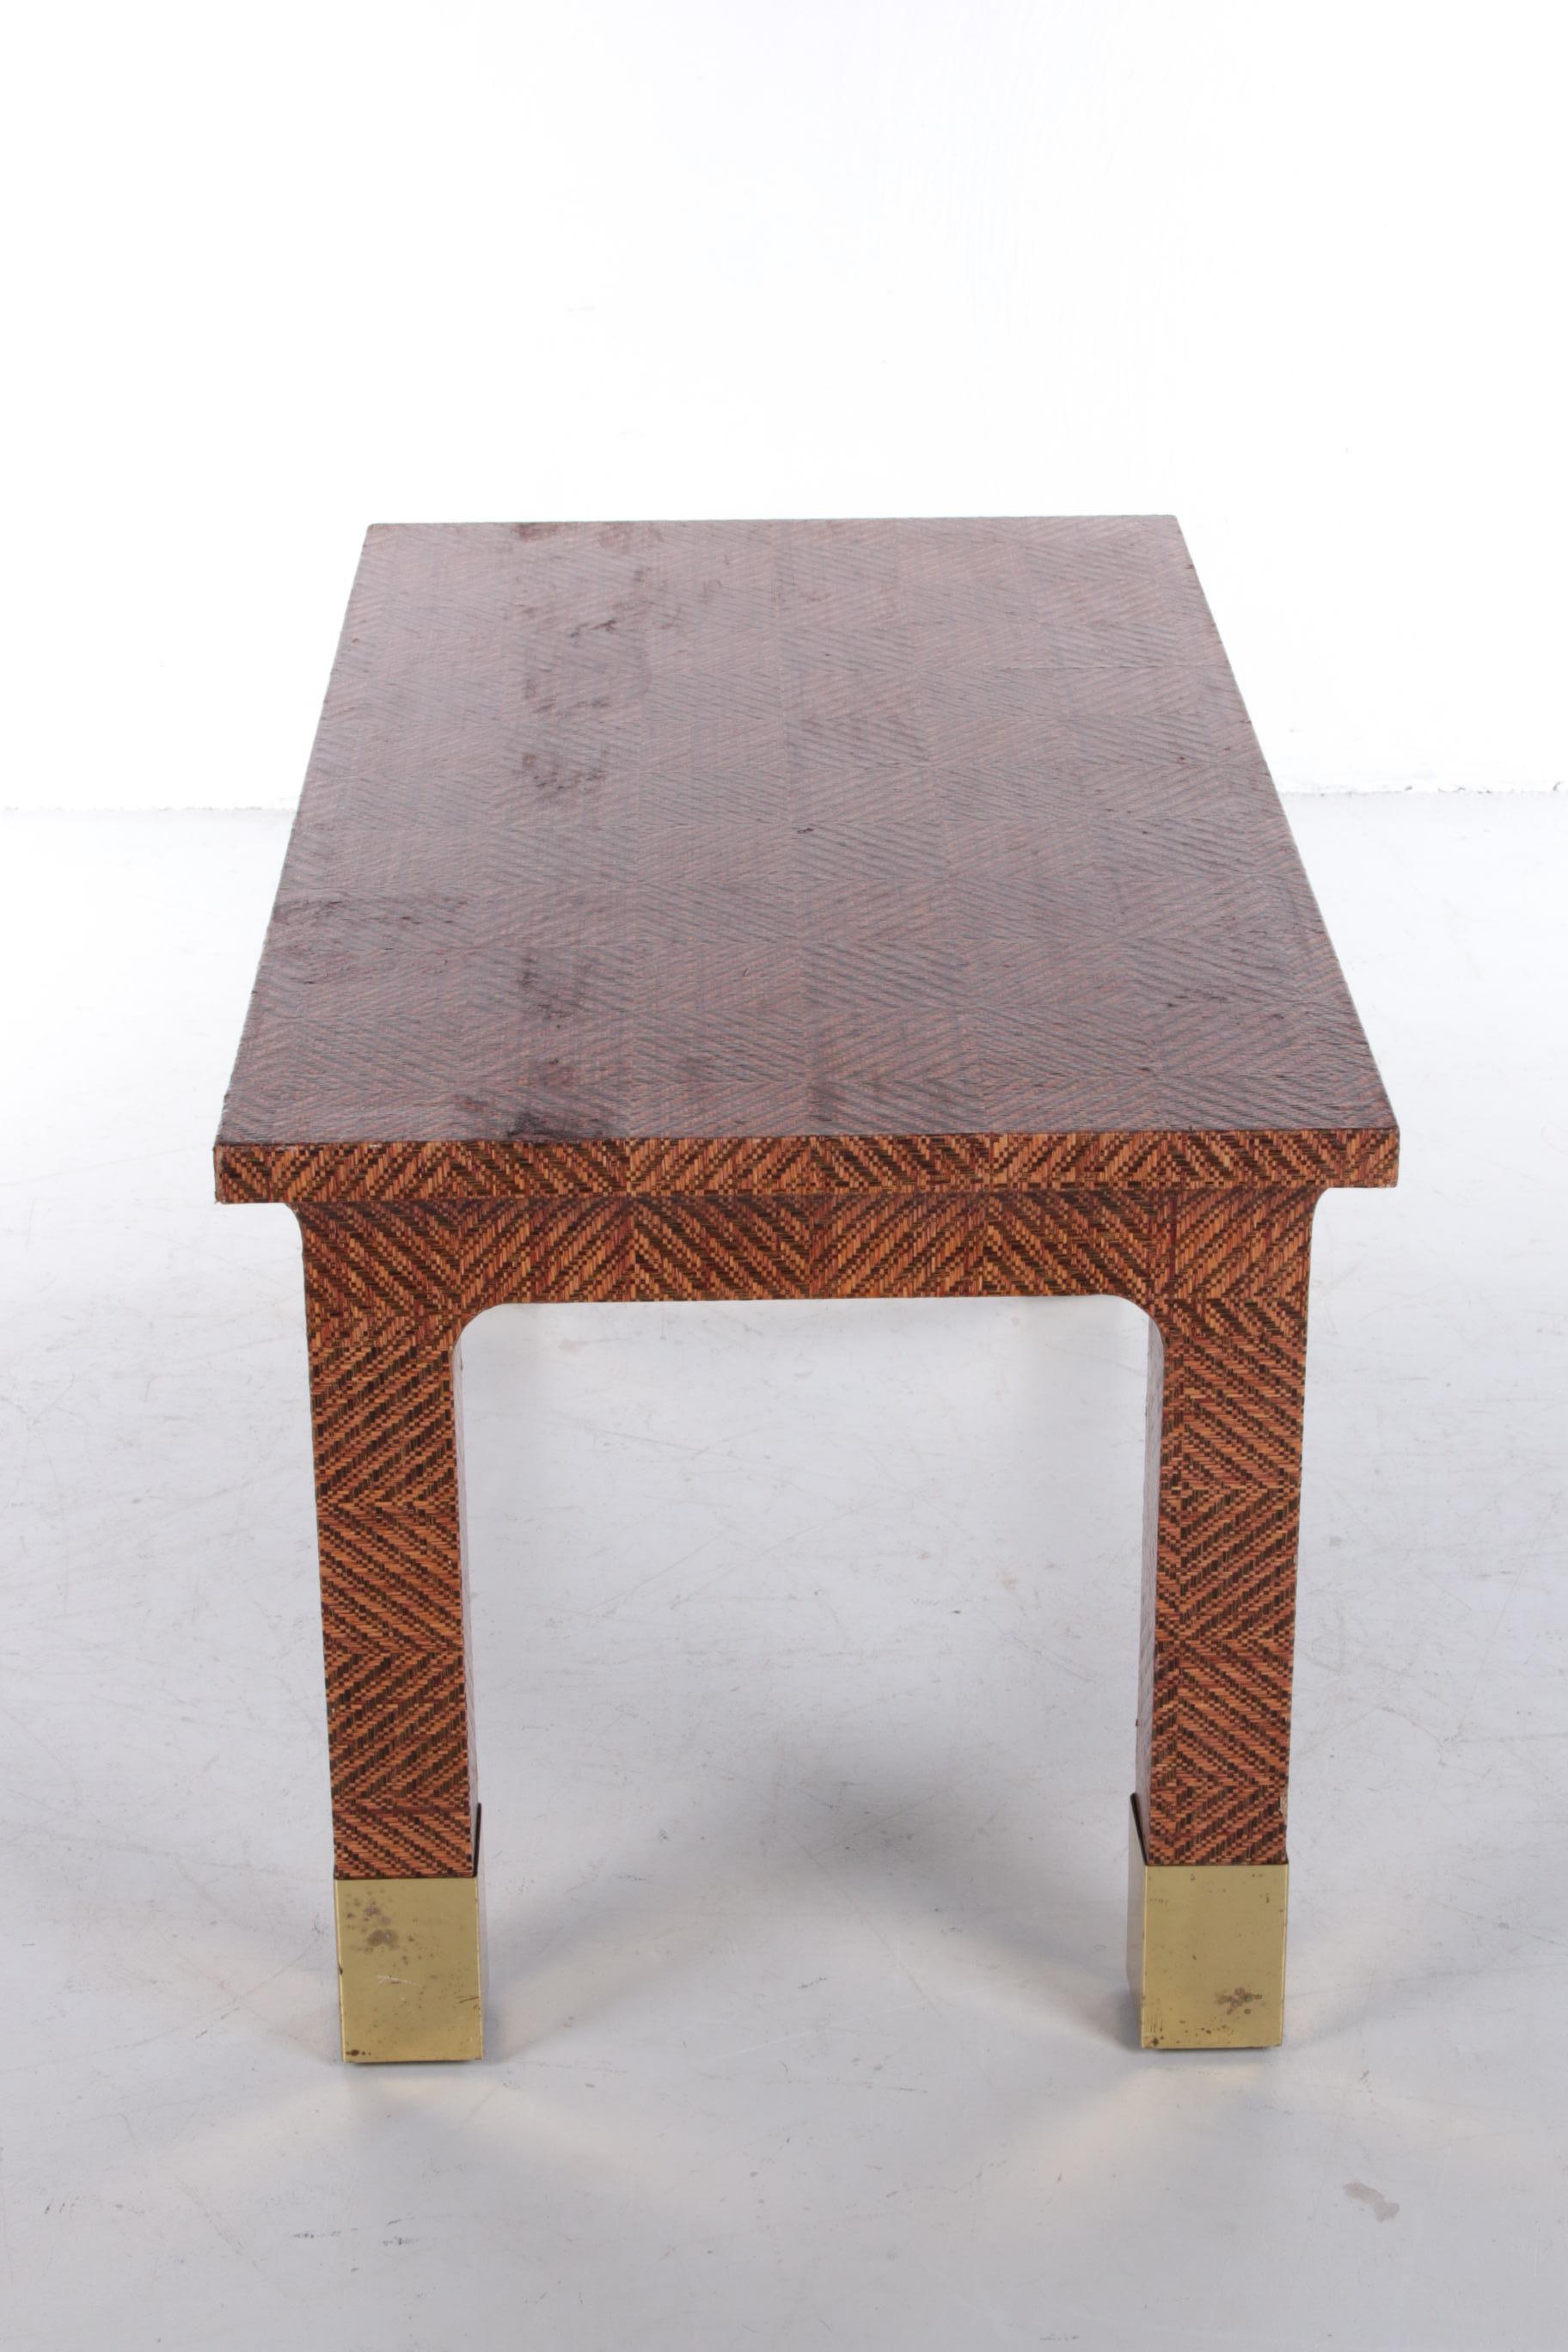 Reclaimed Wood Harrison Van Horn Raffia and Brass Rectangle Coffee Table, 1970 For Sale